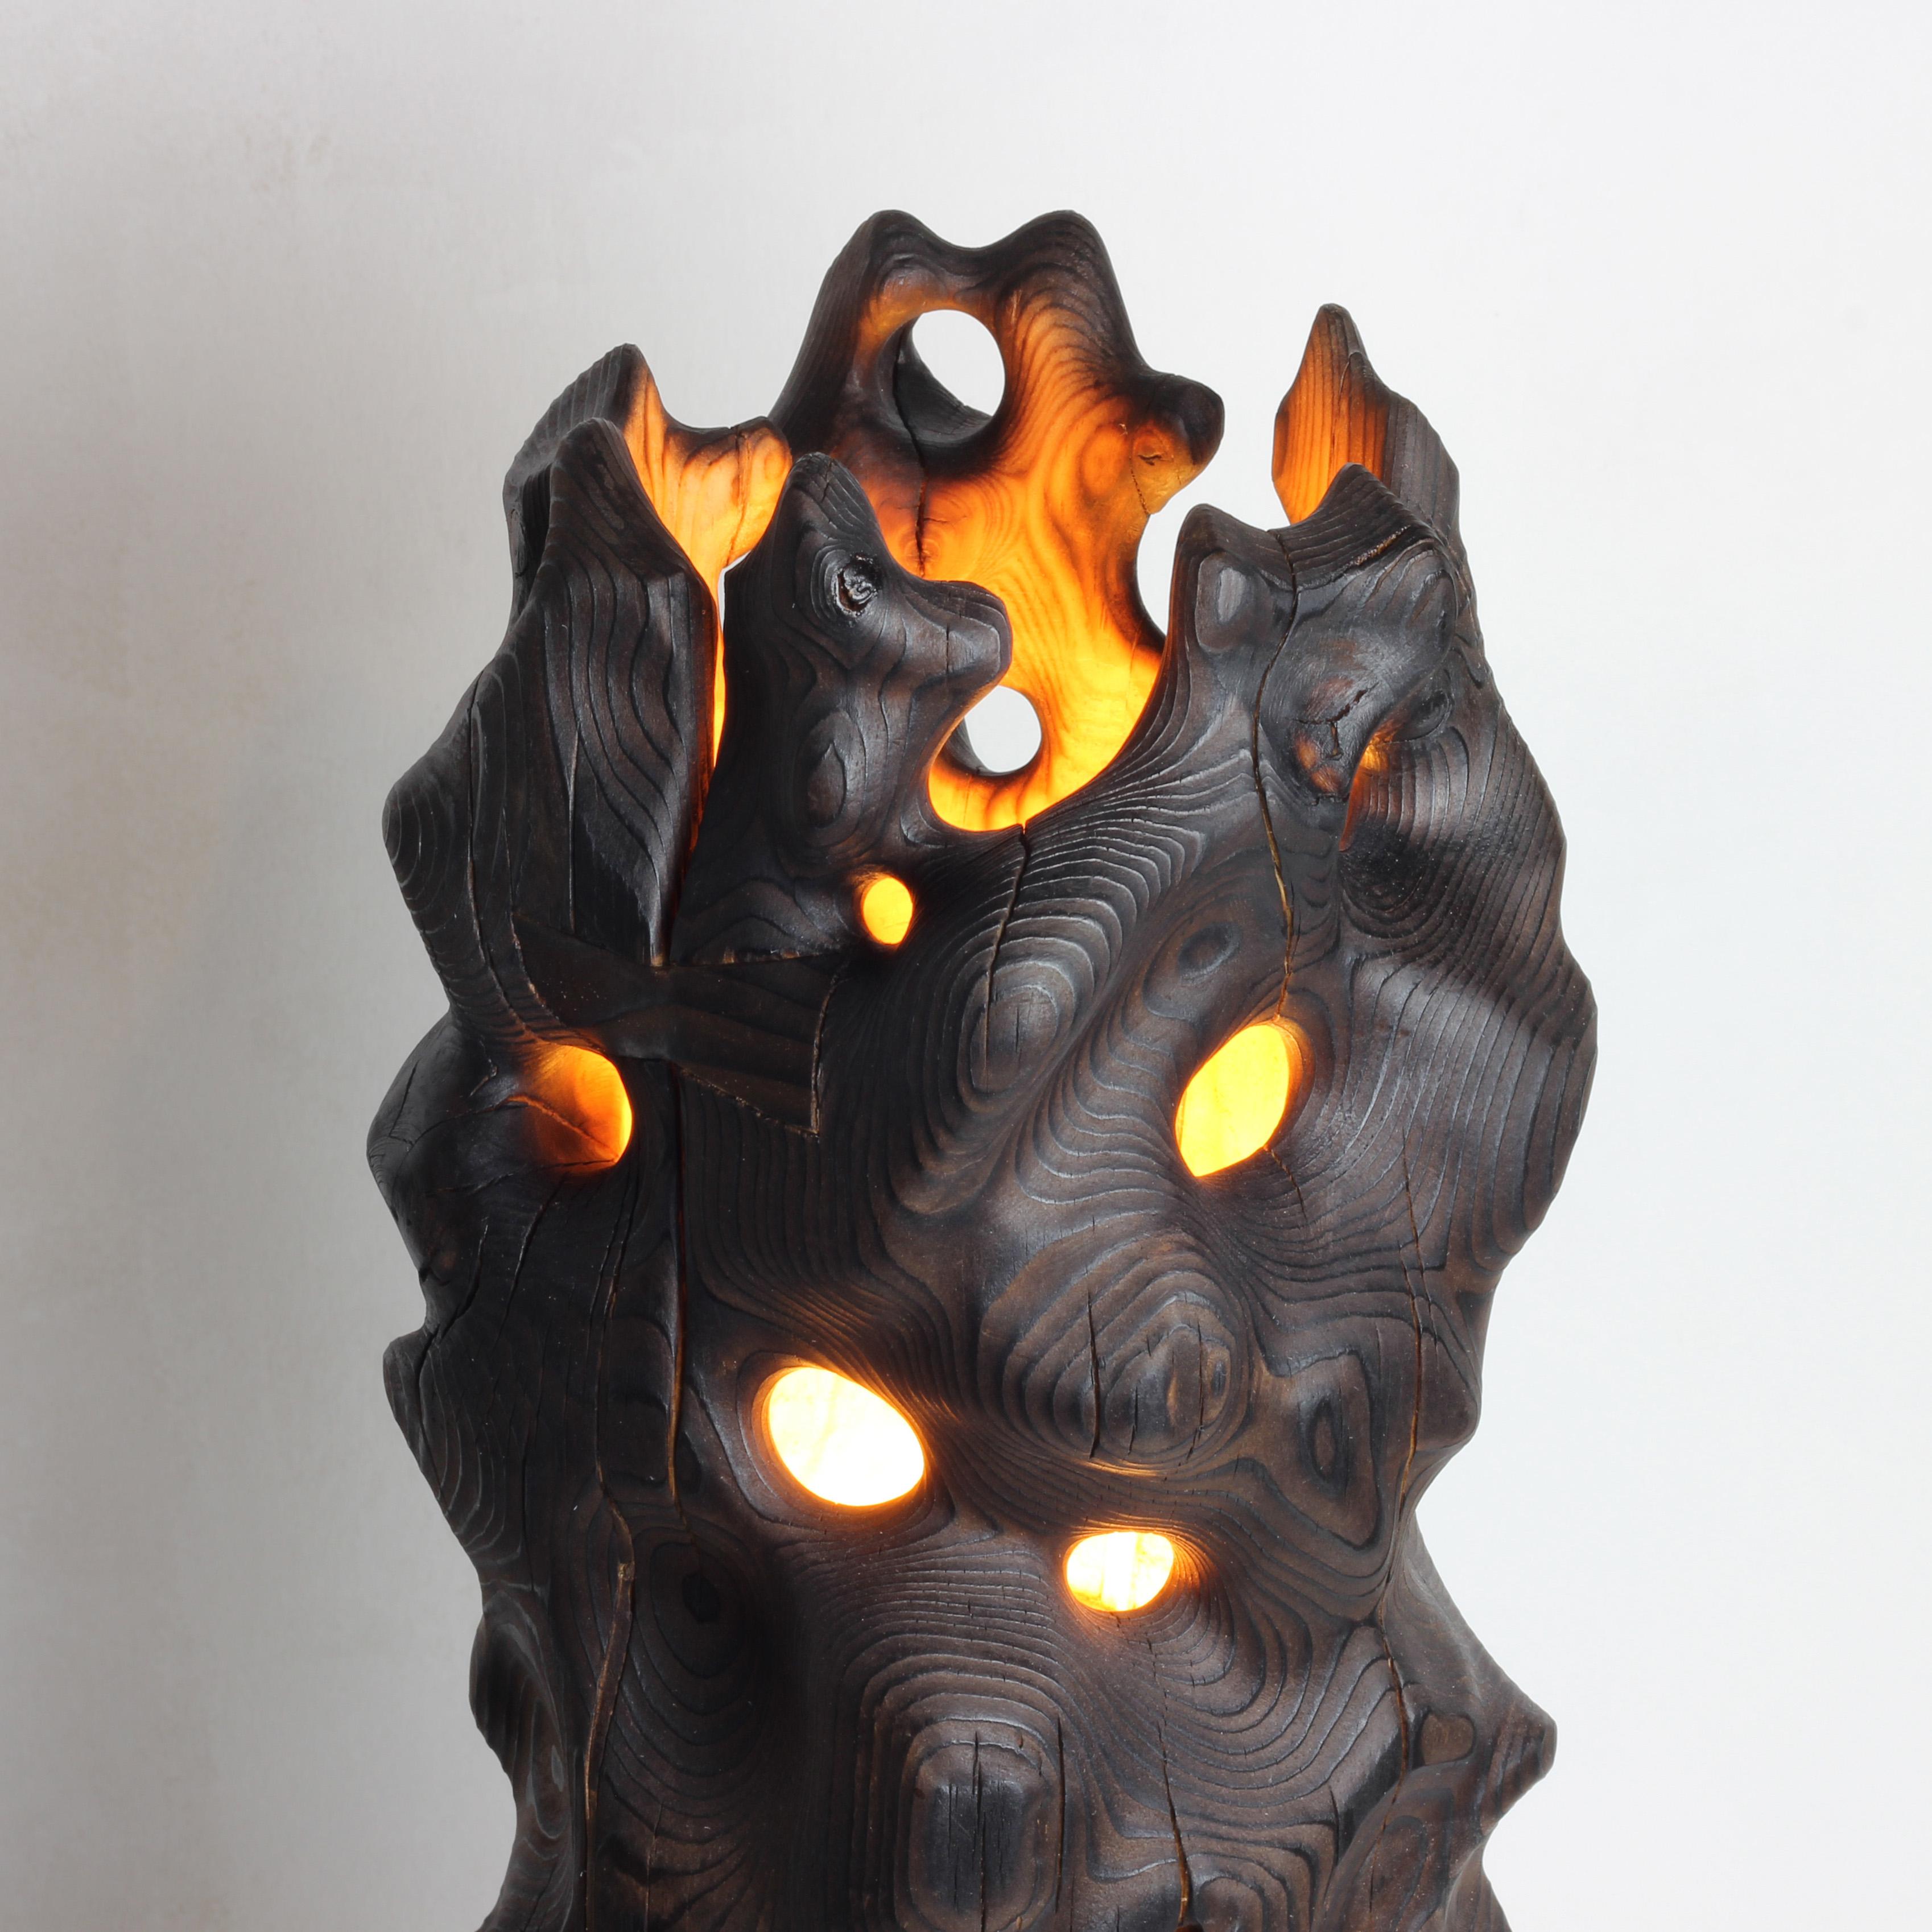 Organic Modern Volcano - Sculptured Lighting, Table Lamp from Reclaimed Burned Wood and Marble For Sale